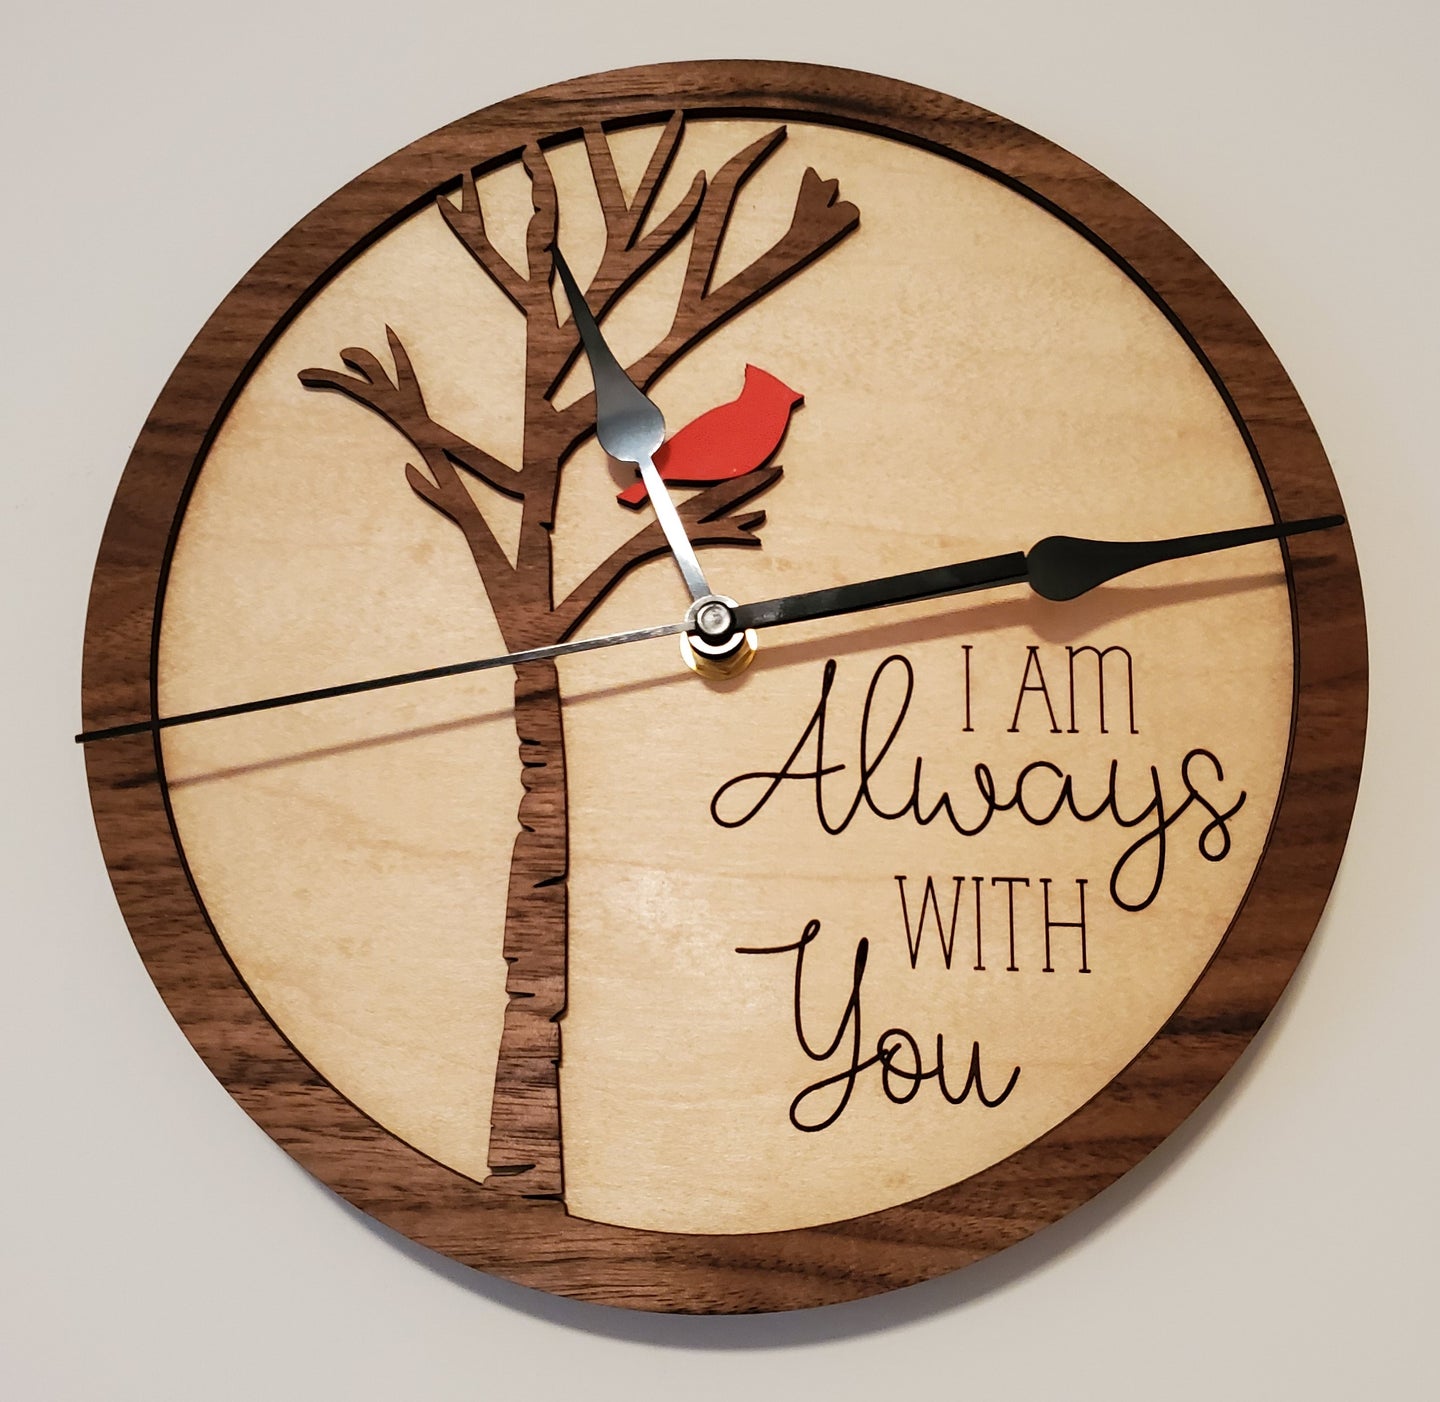 I am always with you cardinal clock wooden engraved (9